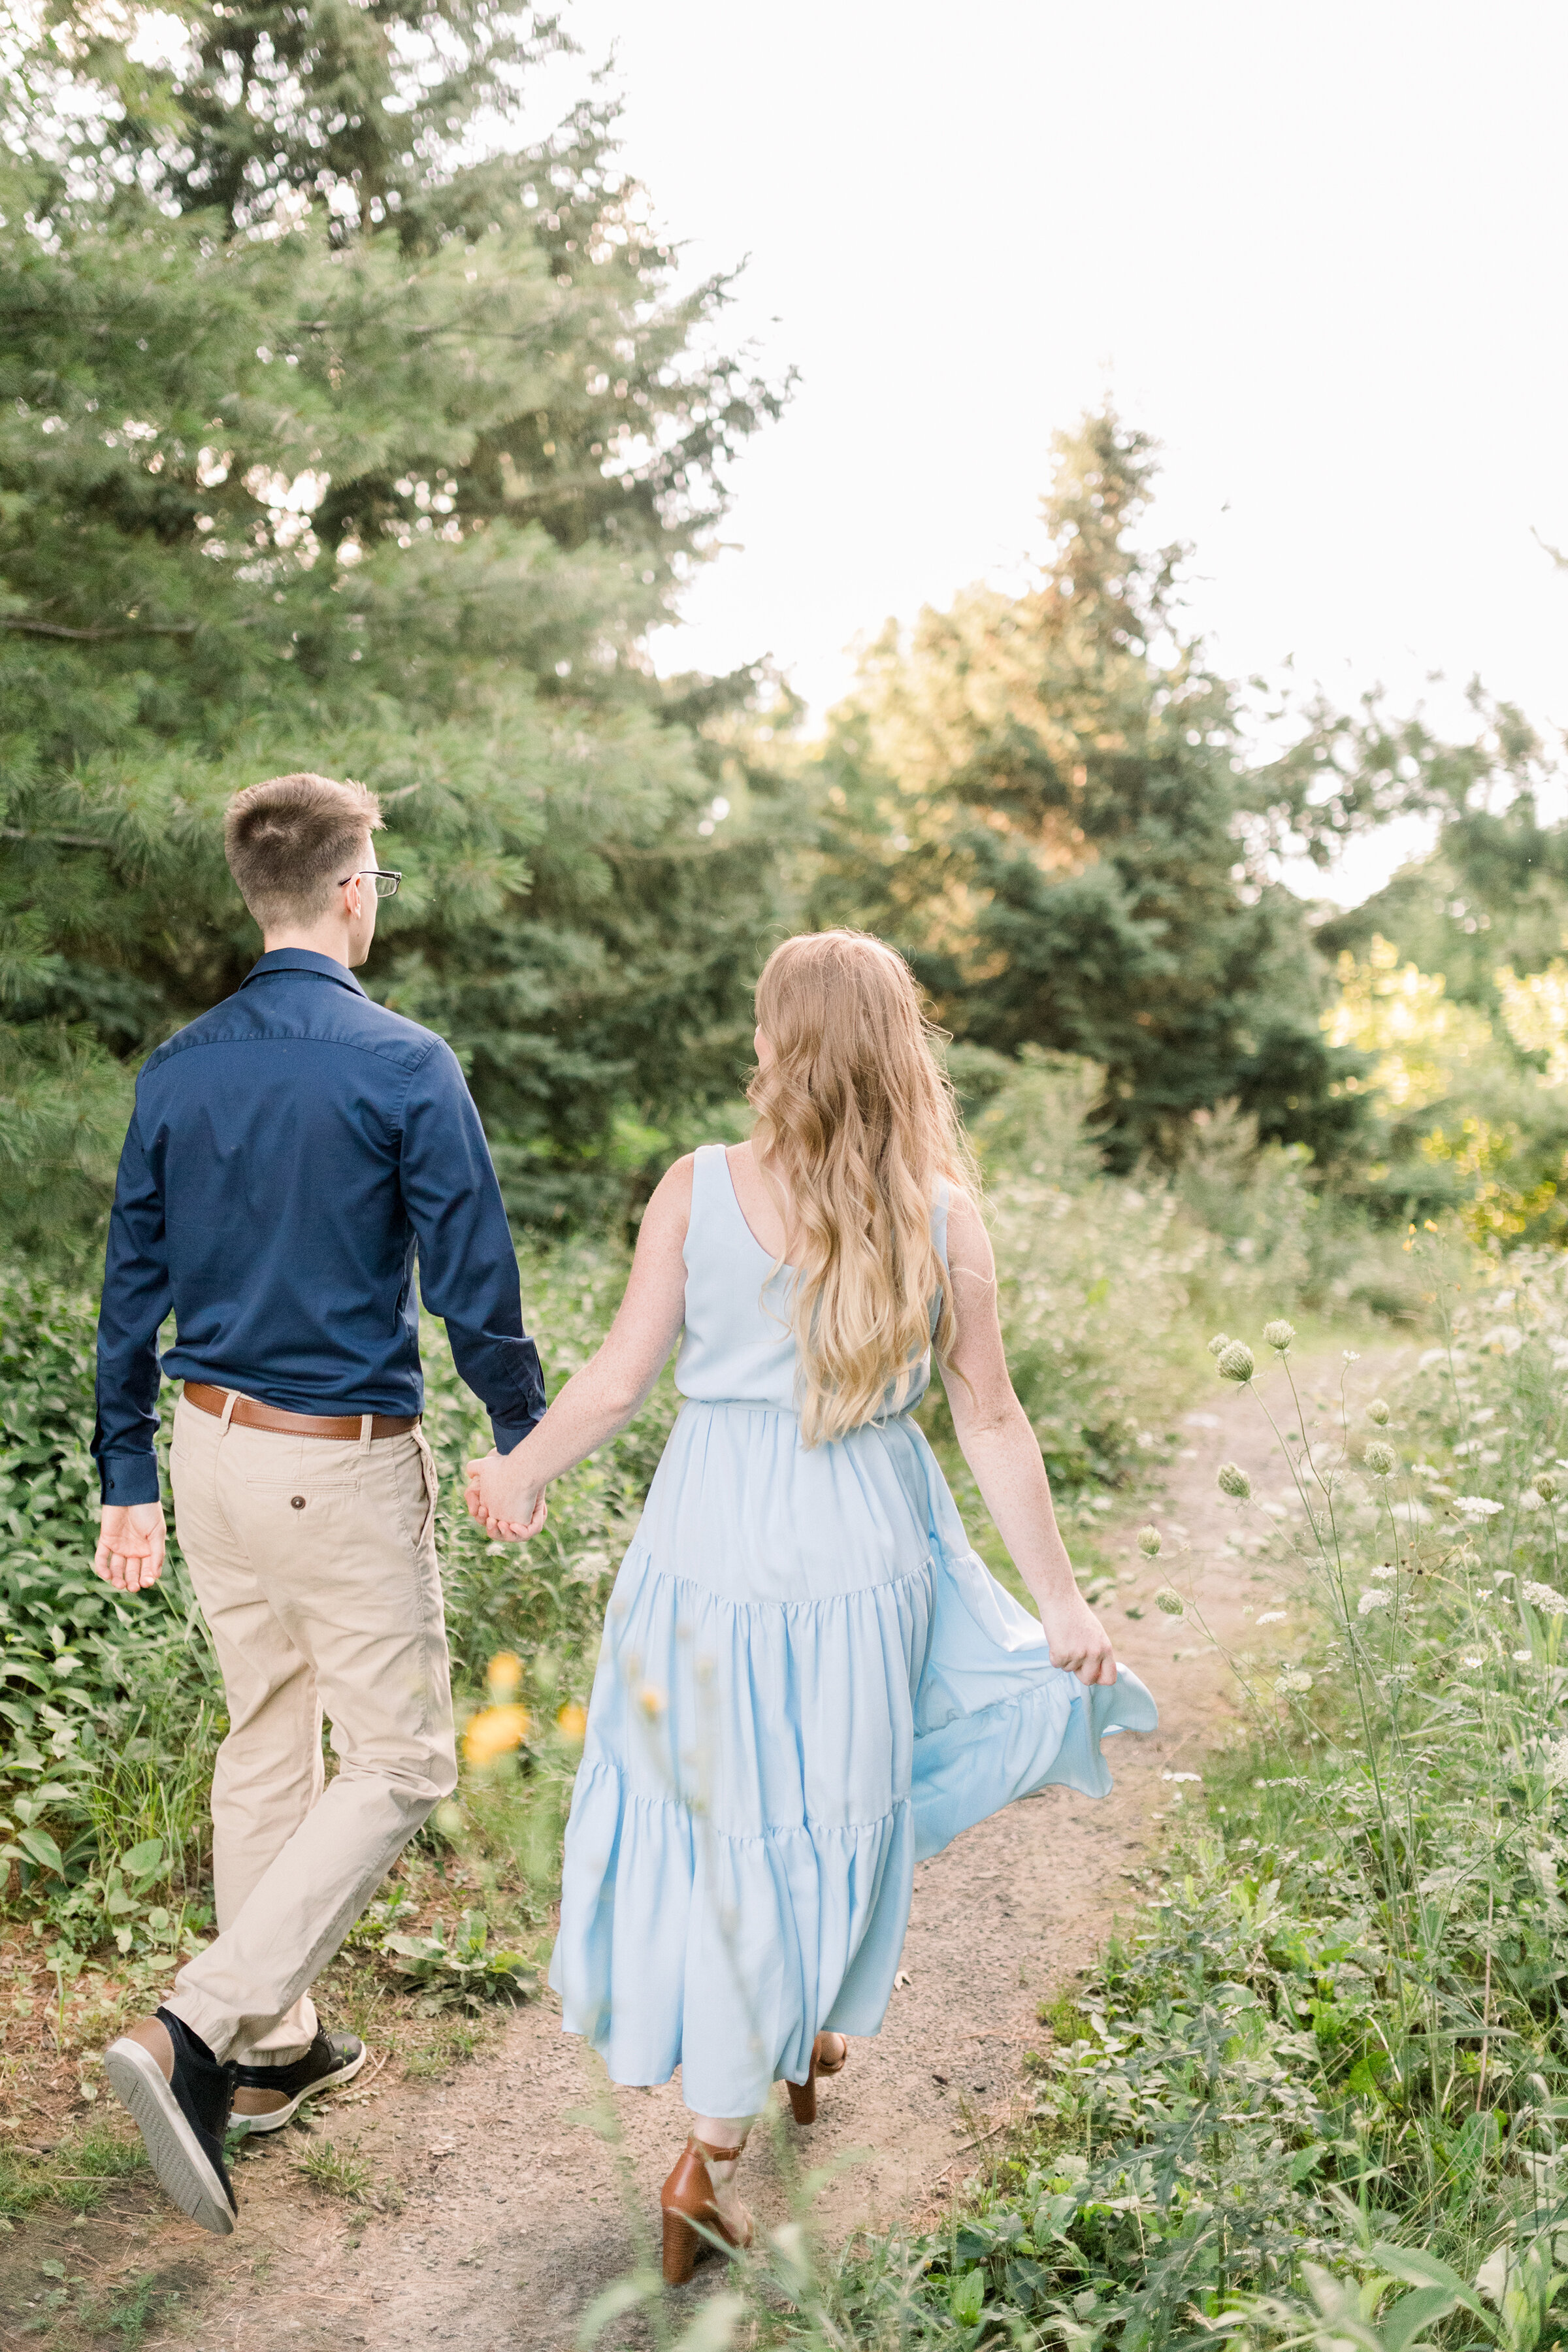  A couple walk together down a wild flower lined path in Dominion Arboretum, Ottawa in an engagement styled photo shoot by Chelsea Mason Photography. Professional engagement photographer outdoor photo shoot location inspiration ideas and goals walkin